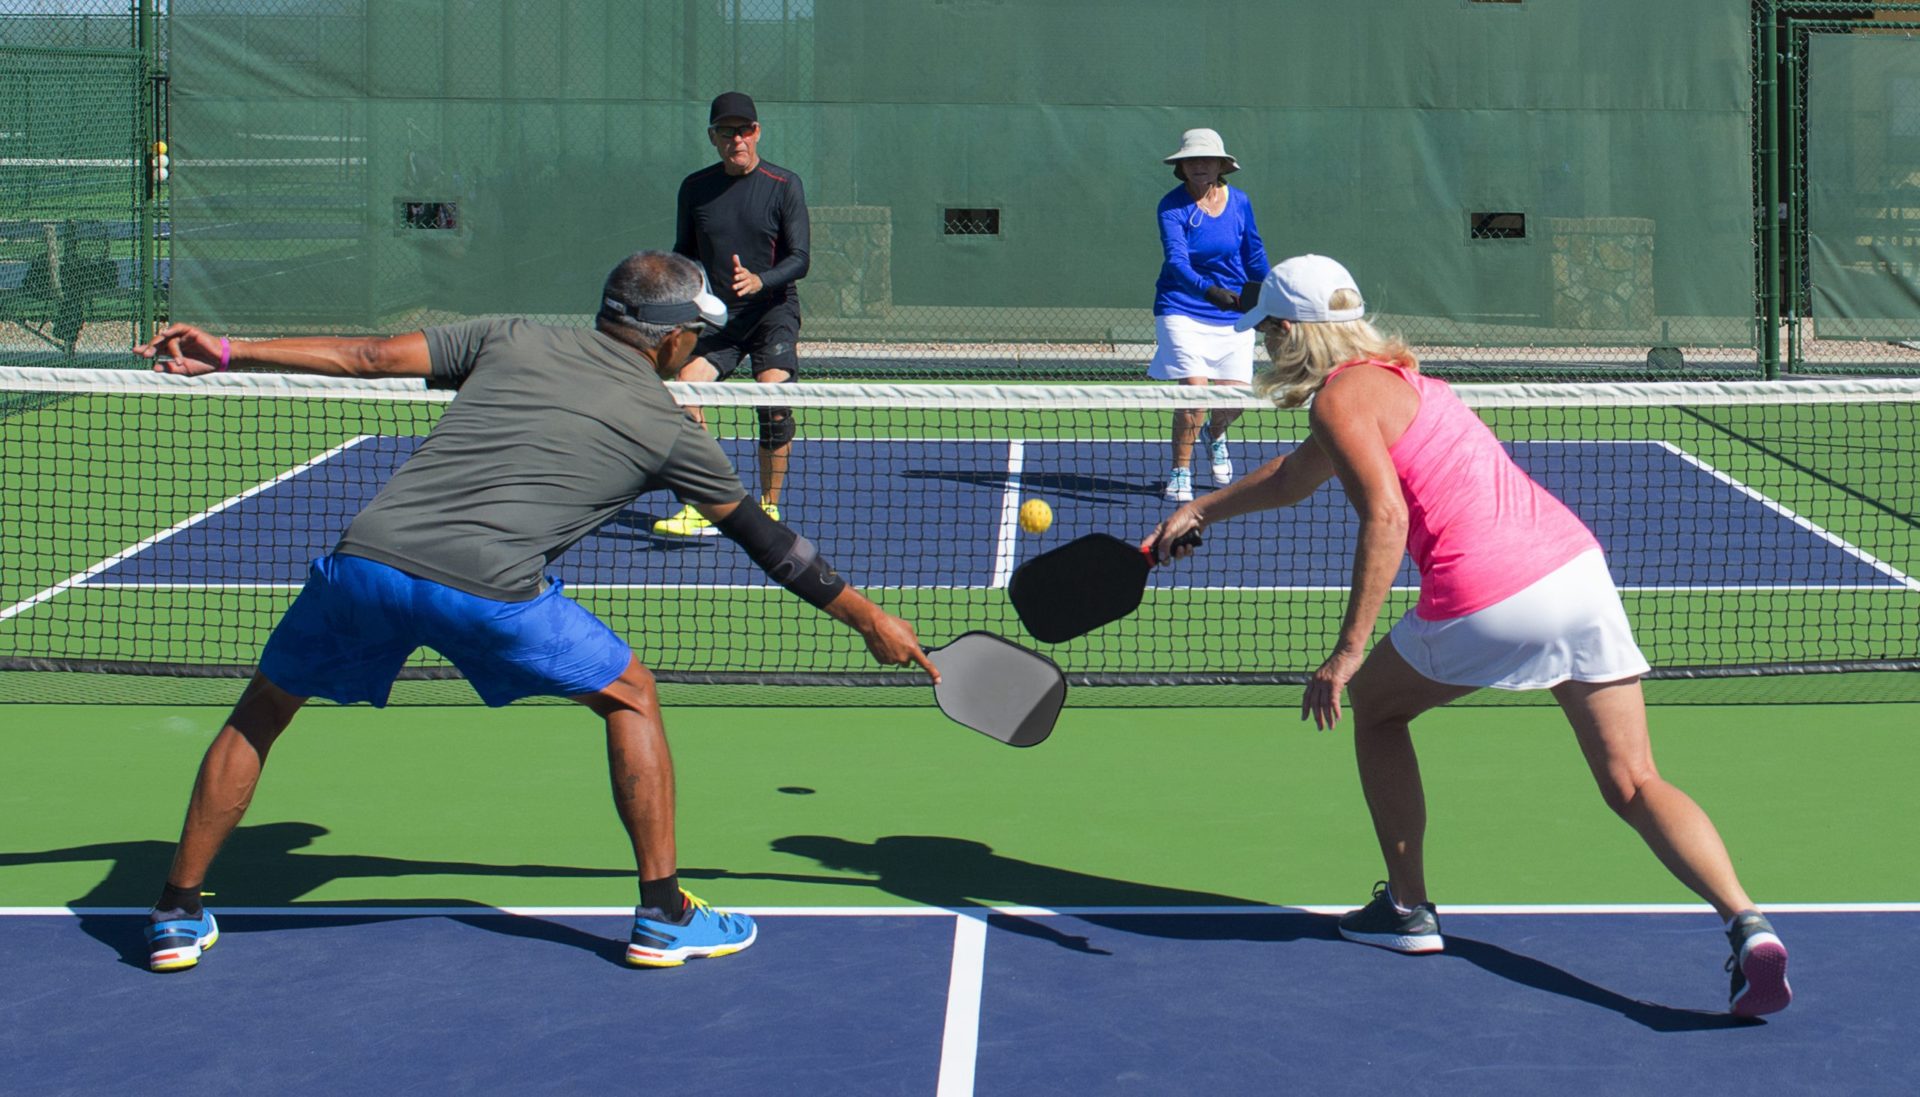 Doubles Tennis 101: A Beginner's Guide to Doubles Tennis Rules